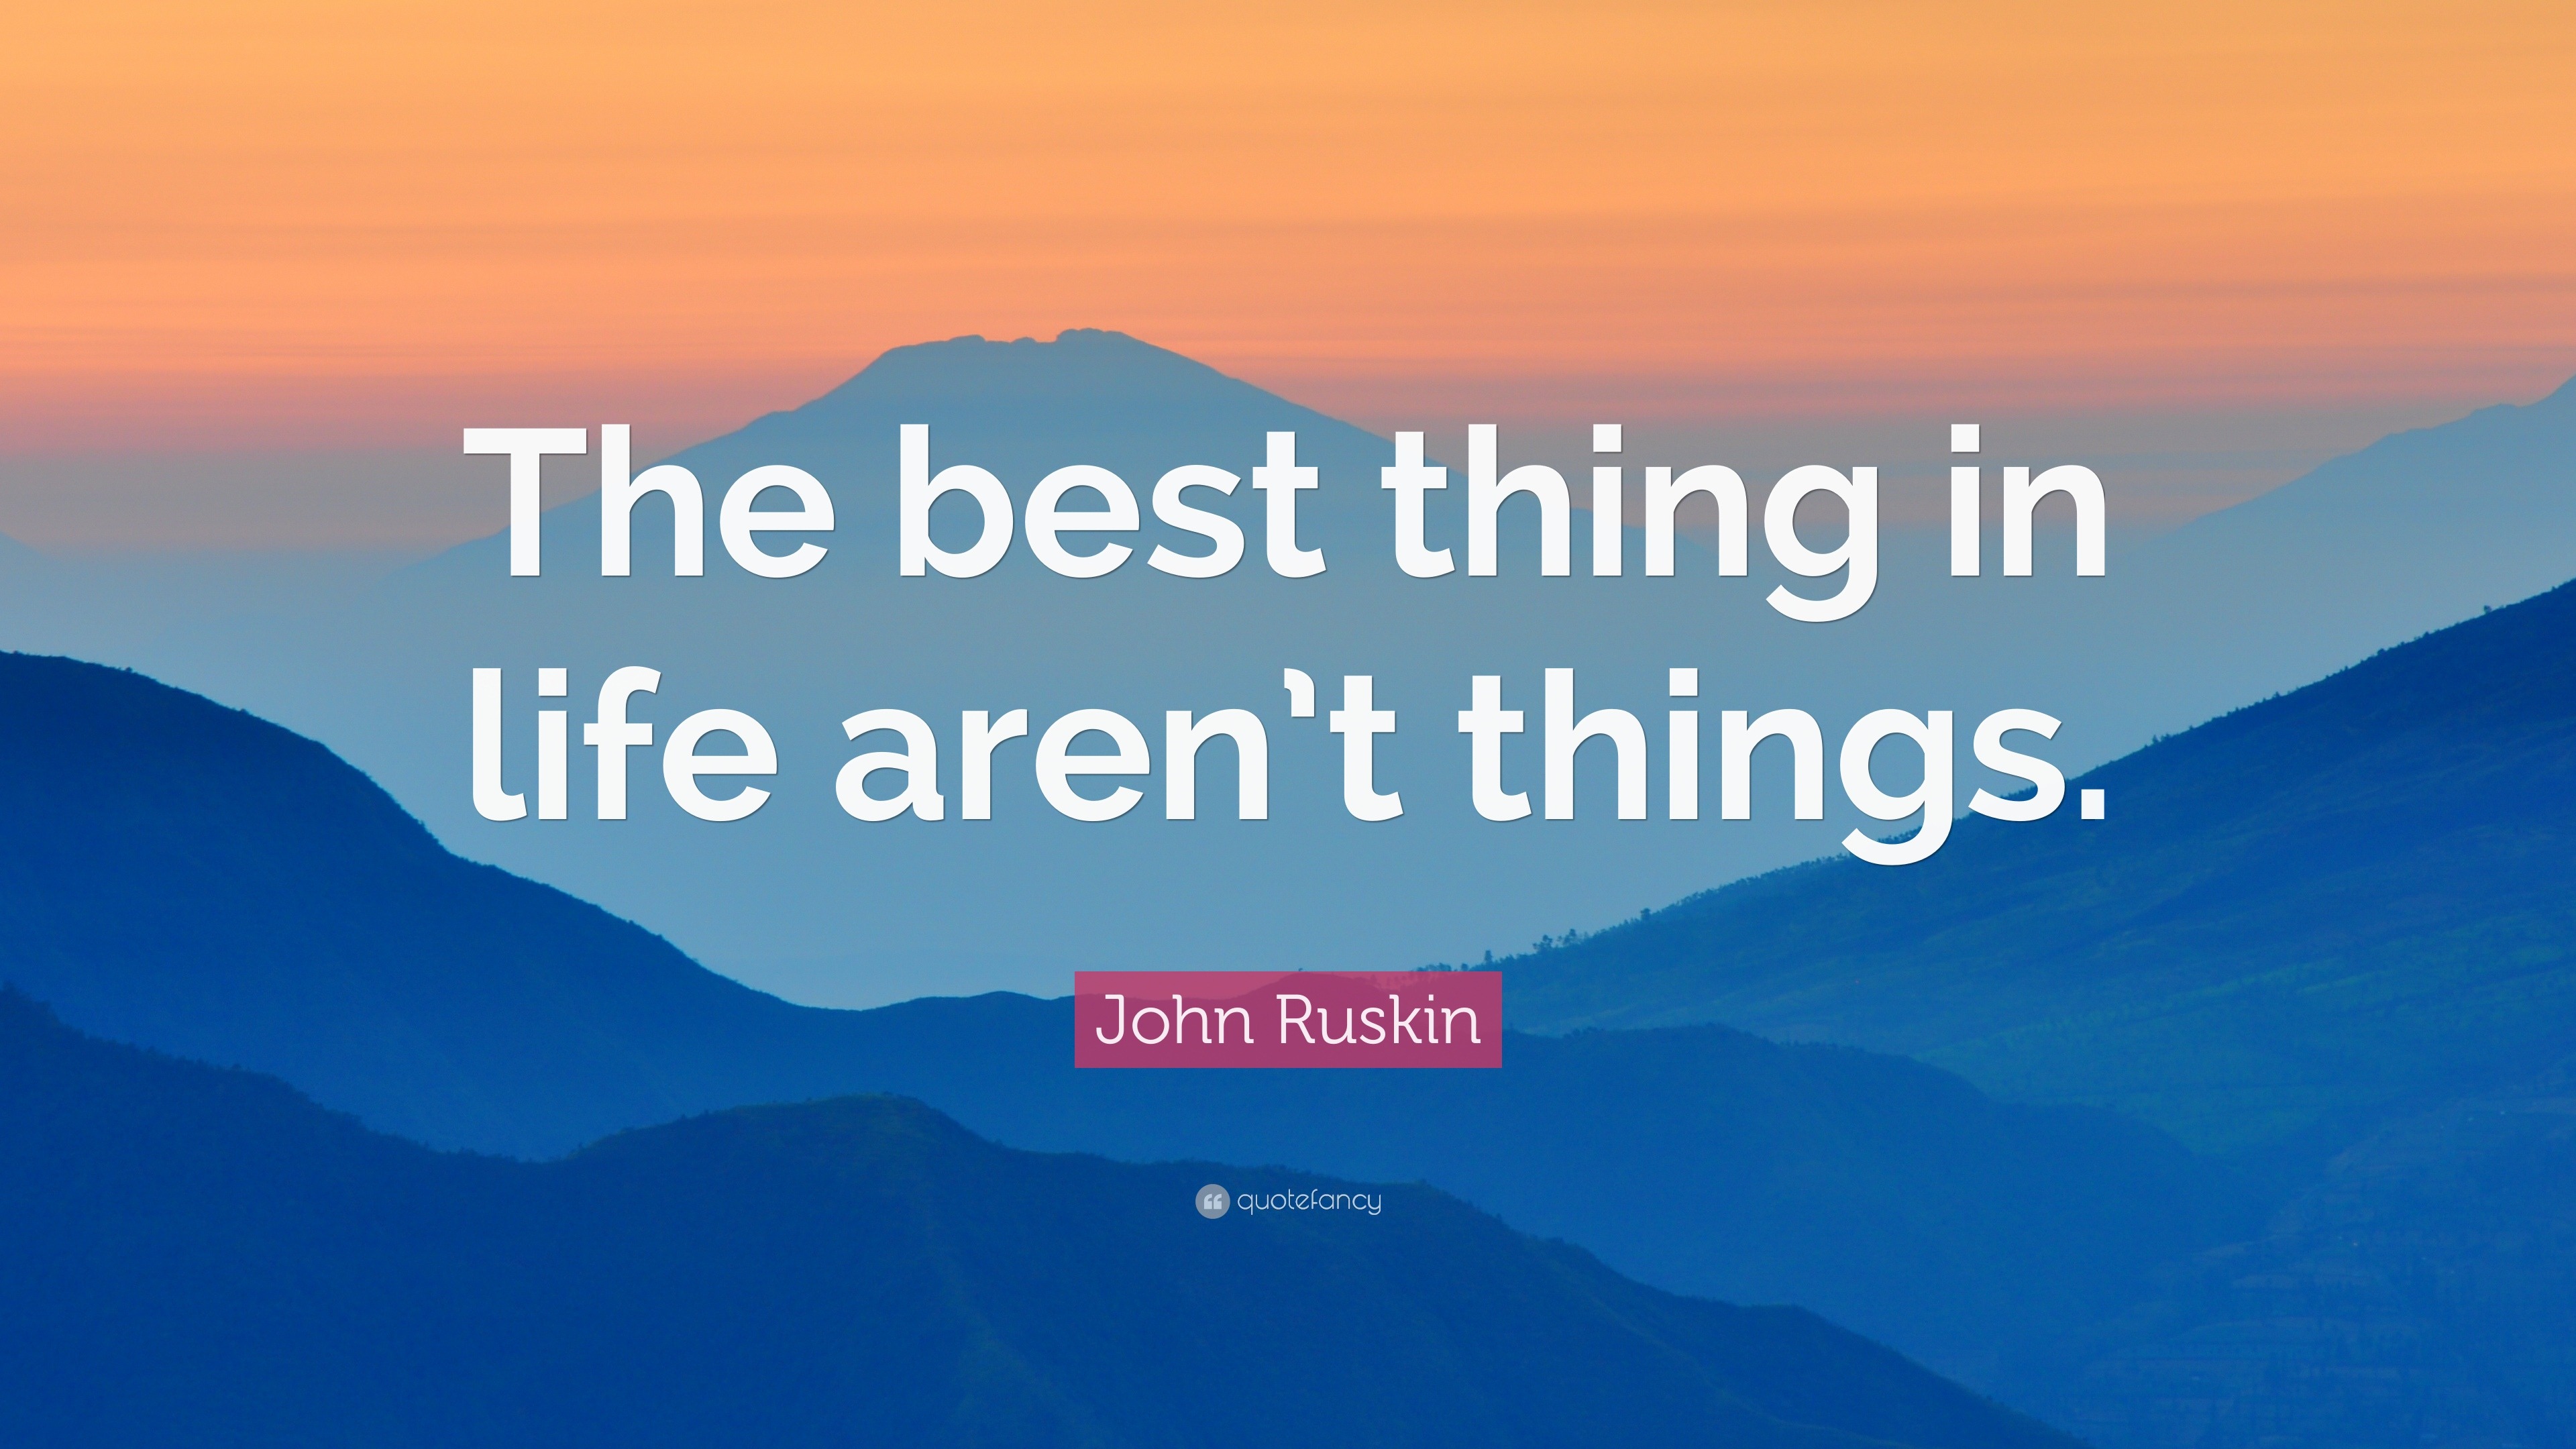 John Ruskin Quote “The best thing in life aren t things ”